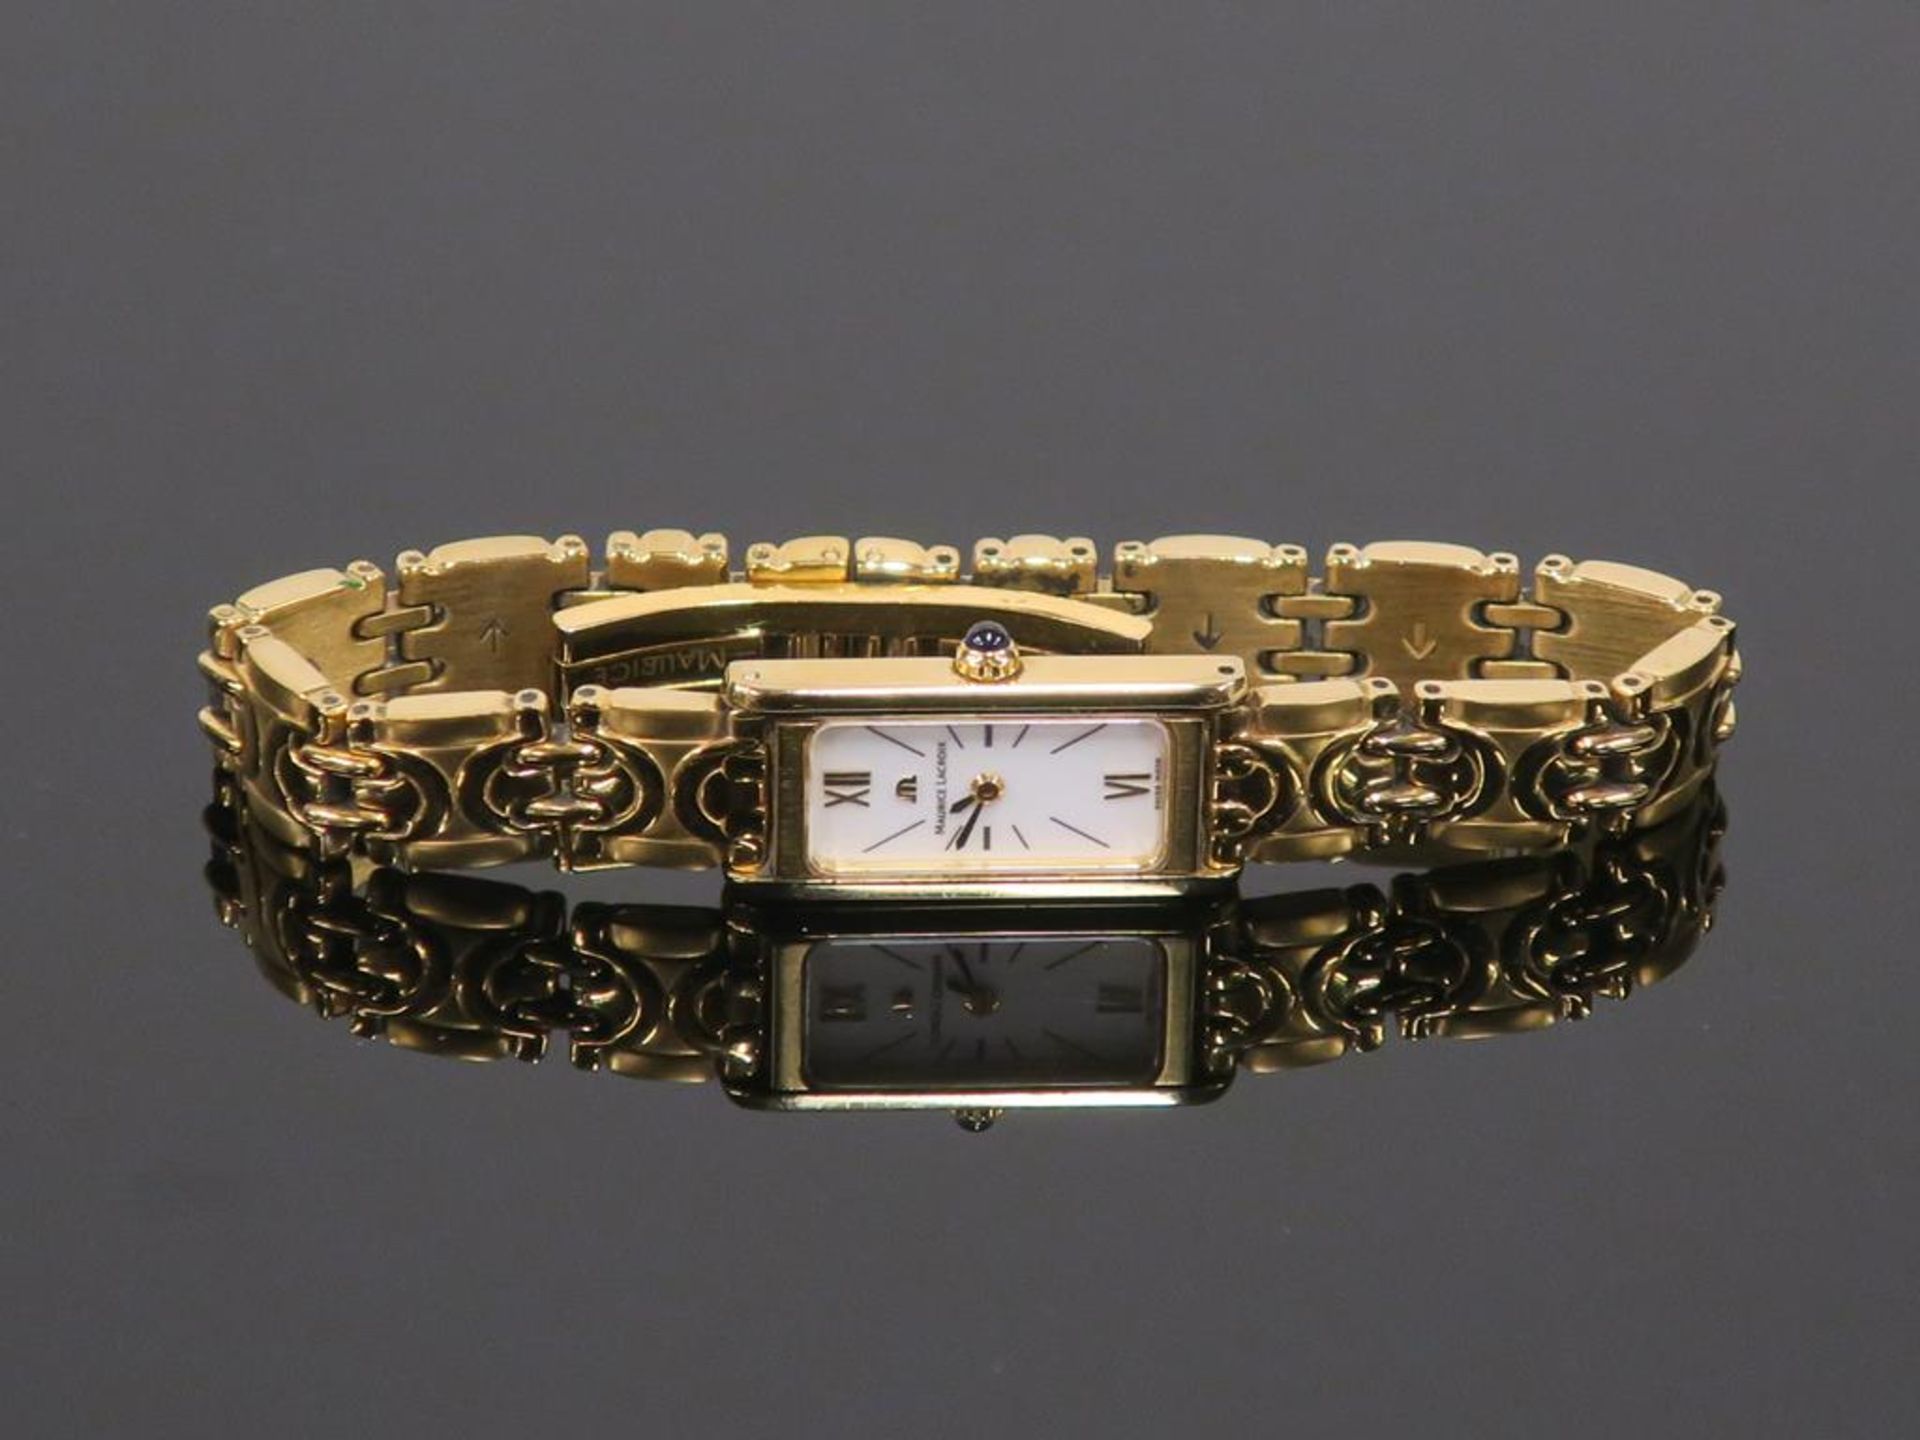 A boxed Maurice Lacroix Swiss made Gold Plated Ladies Watch (est £80-£100) - Image 2 of 4